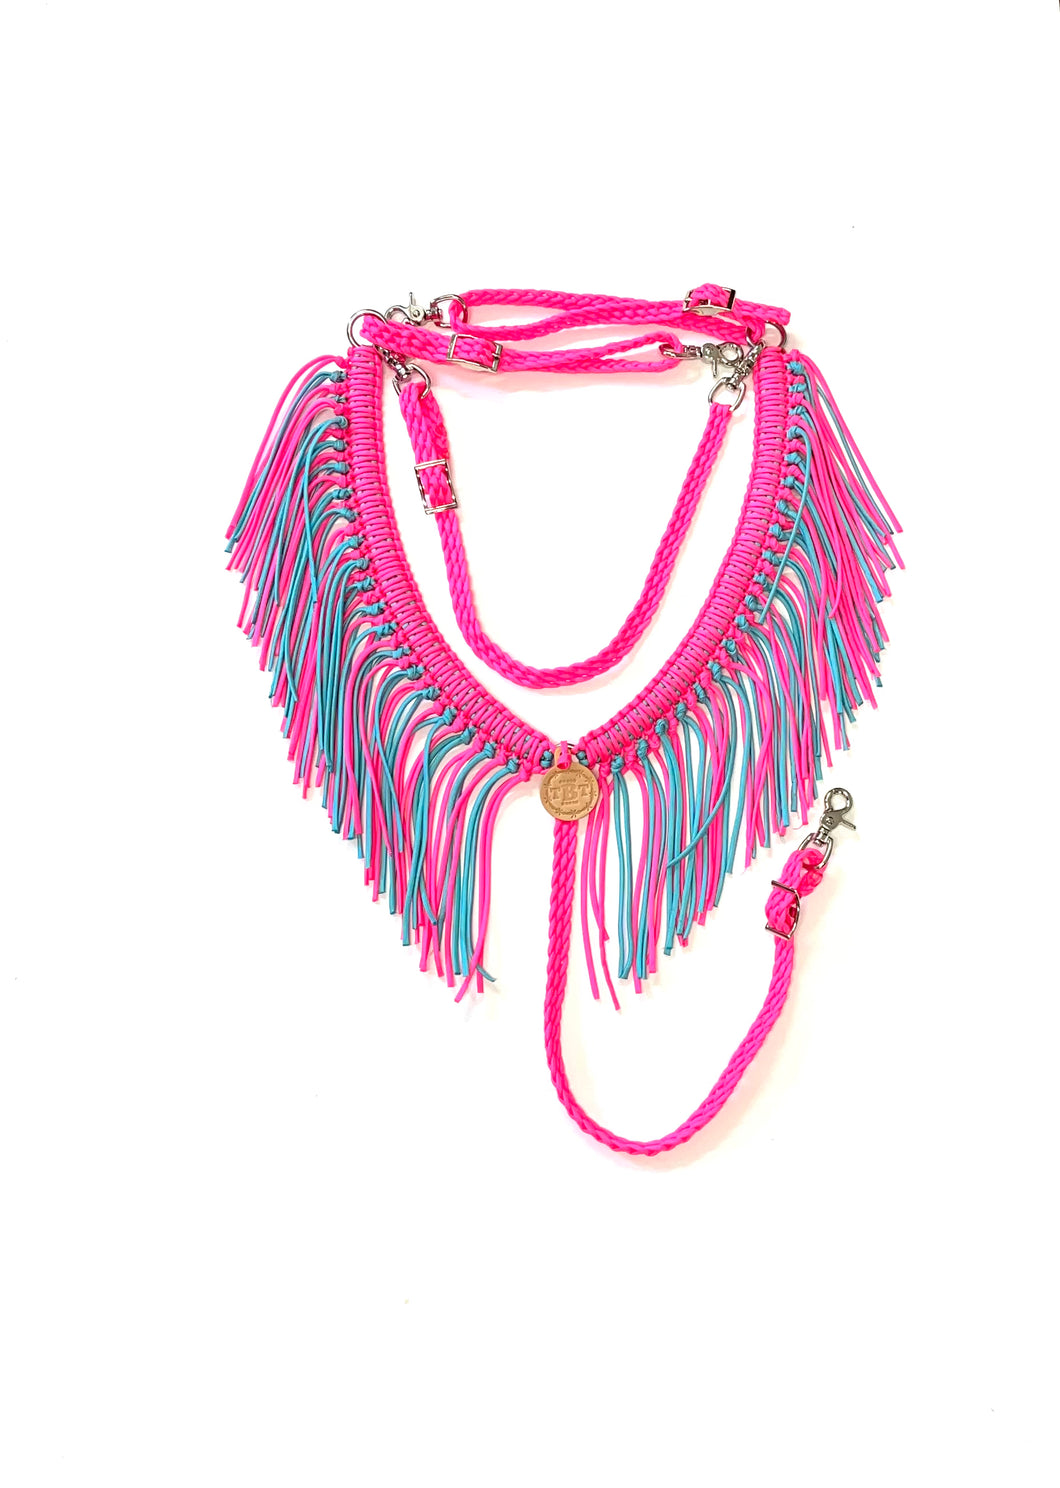 fringe breast collar neon hot pink and light teal with a wither strap